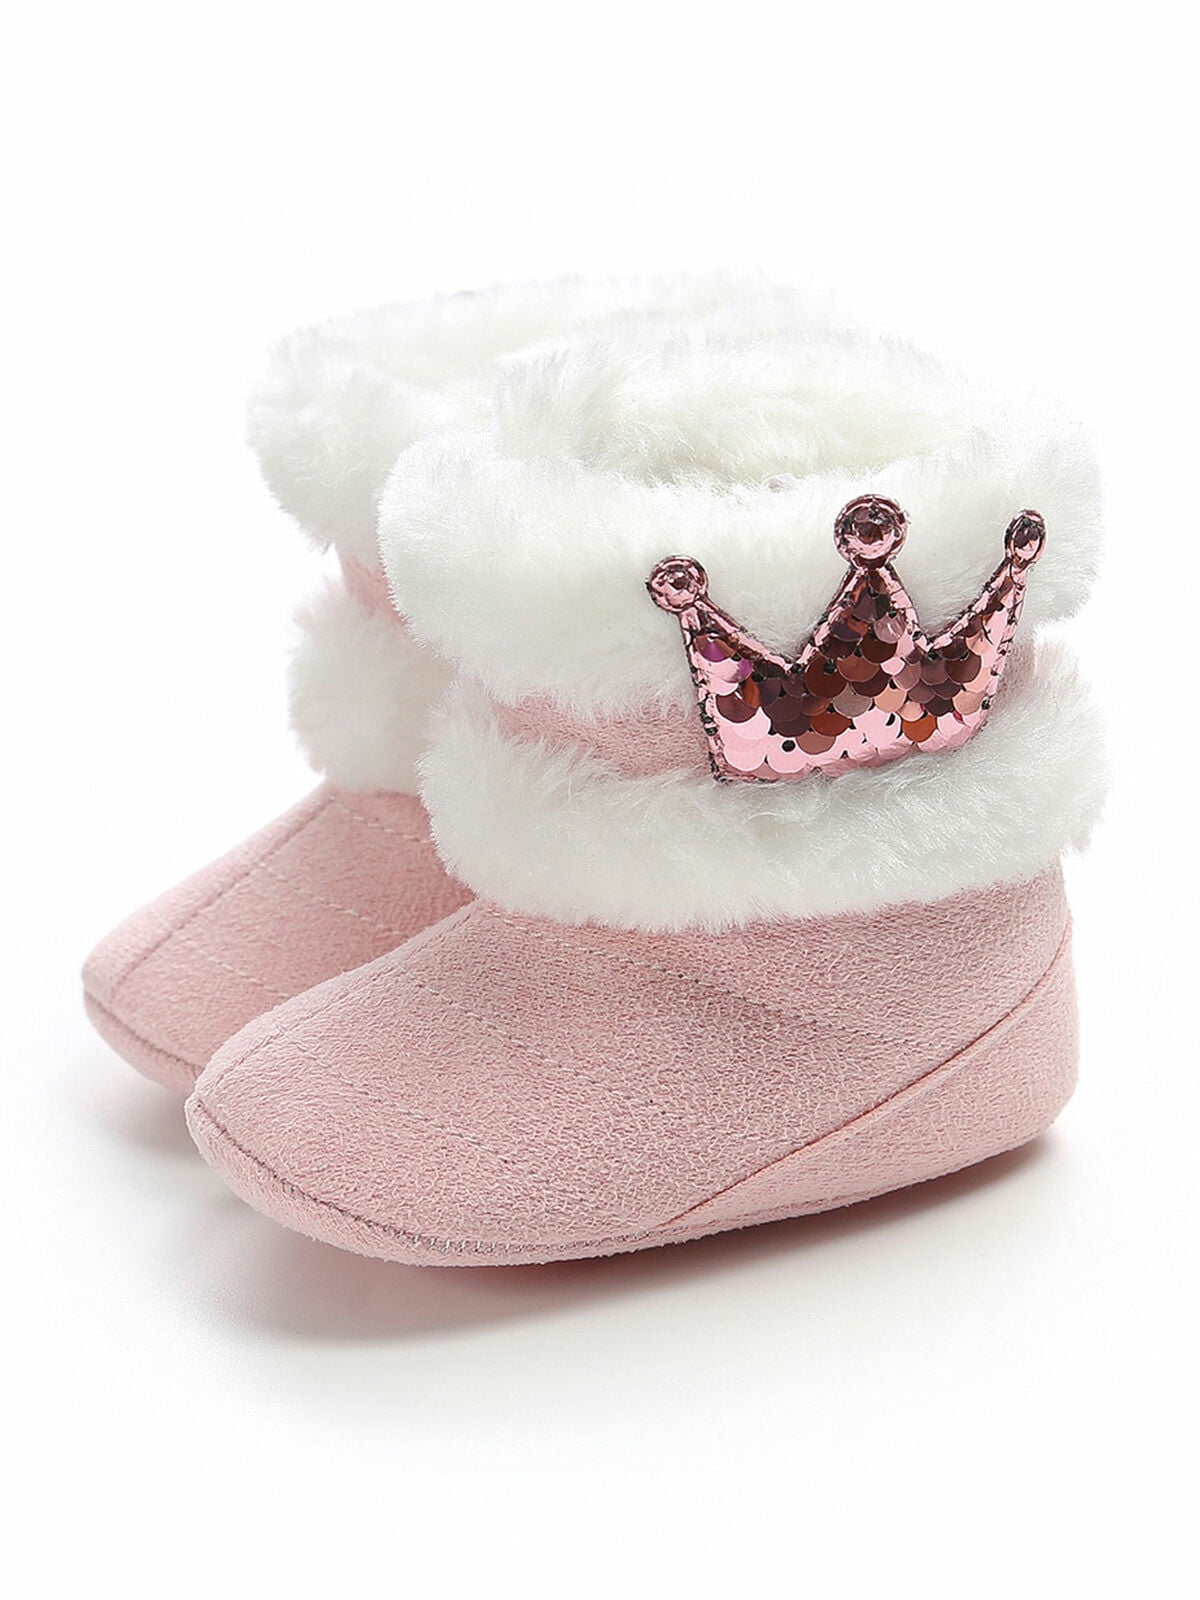 Newborn Infant Baby Girl Soft Fur With Bow Boots shoes warm winter fall snow 